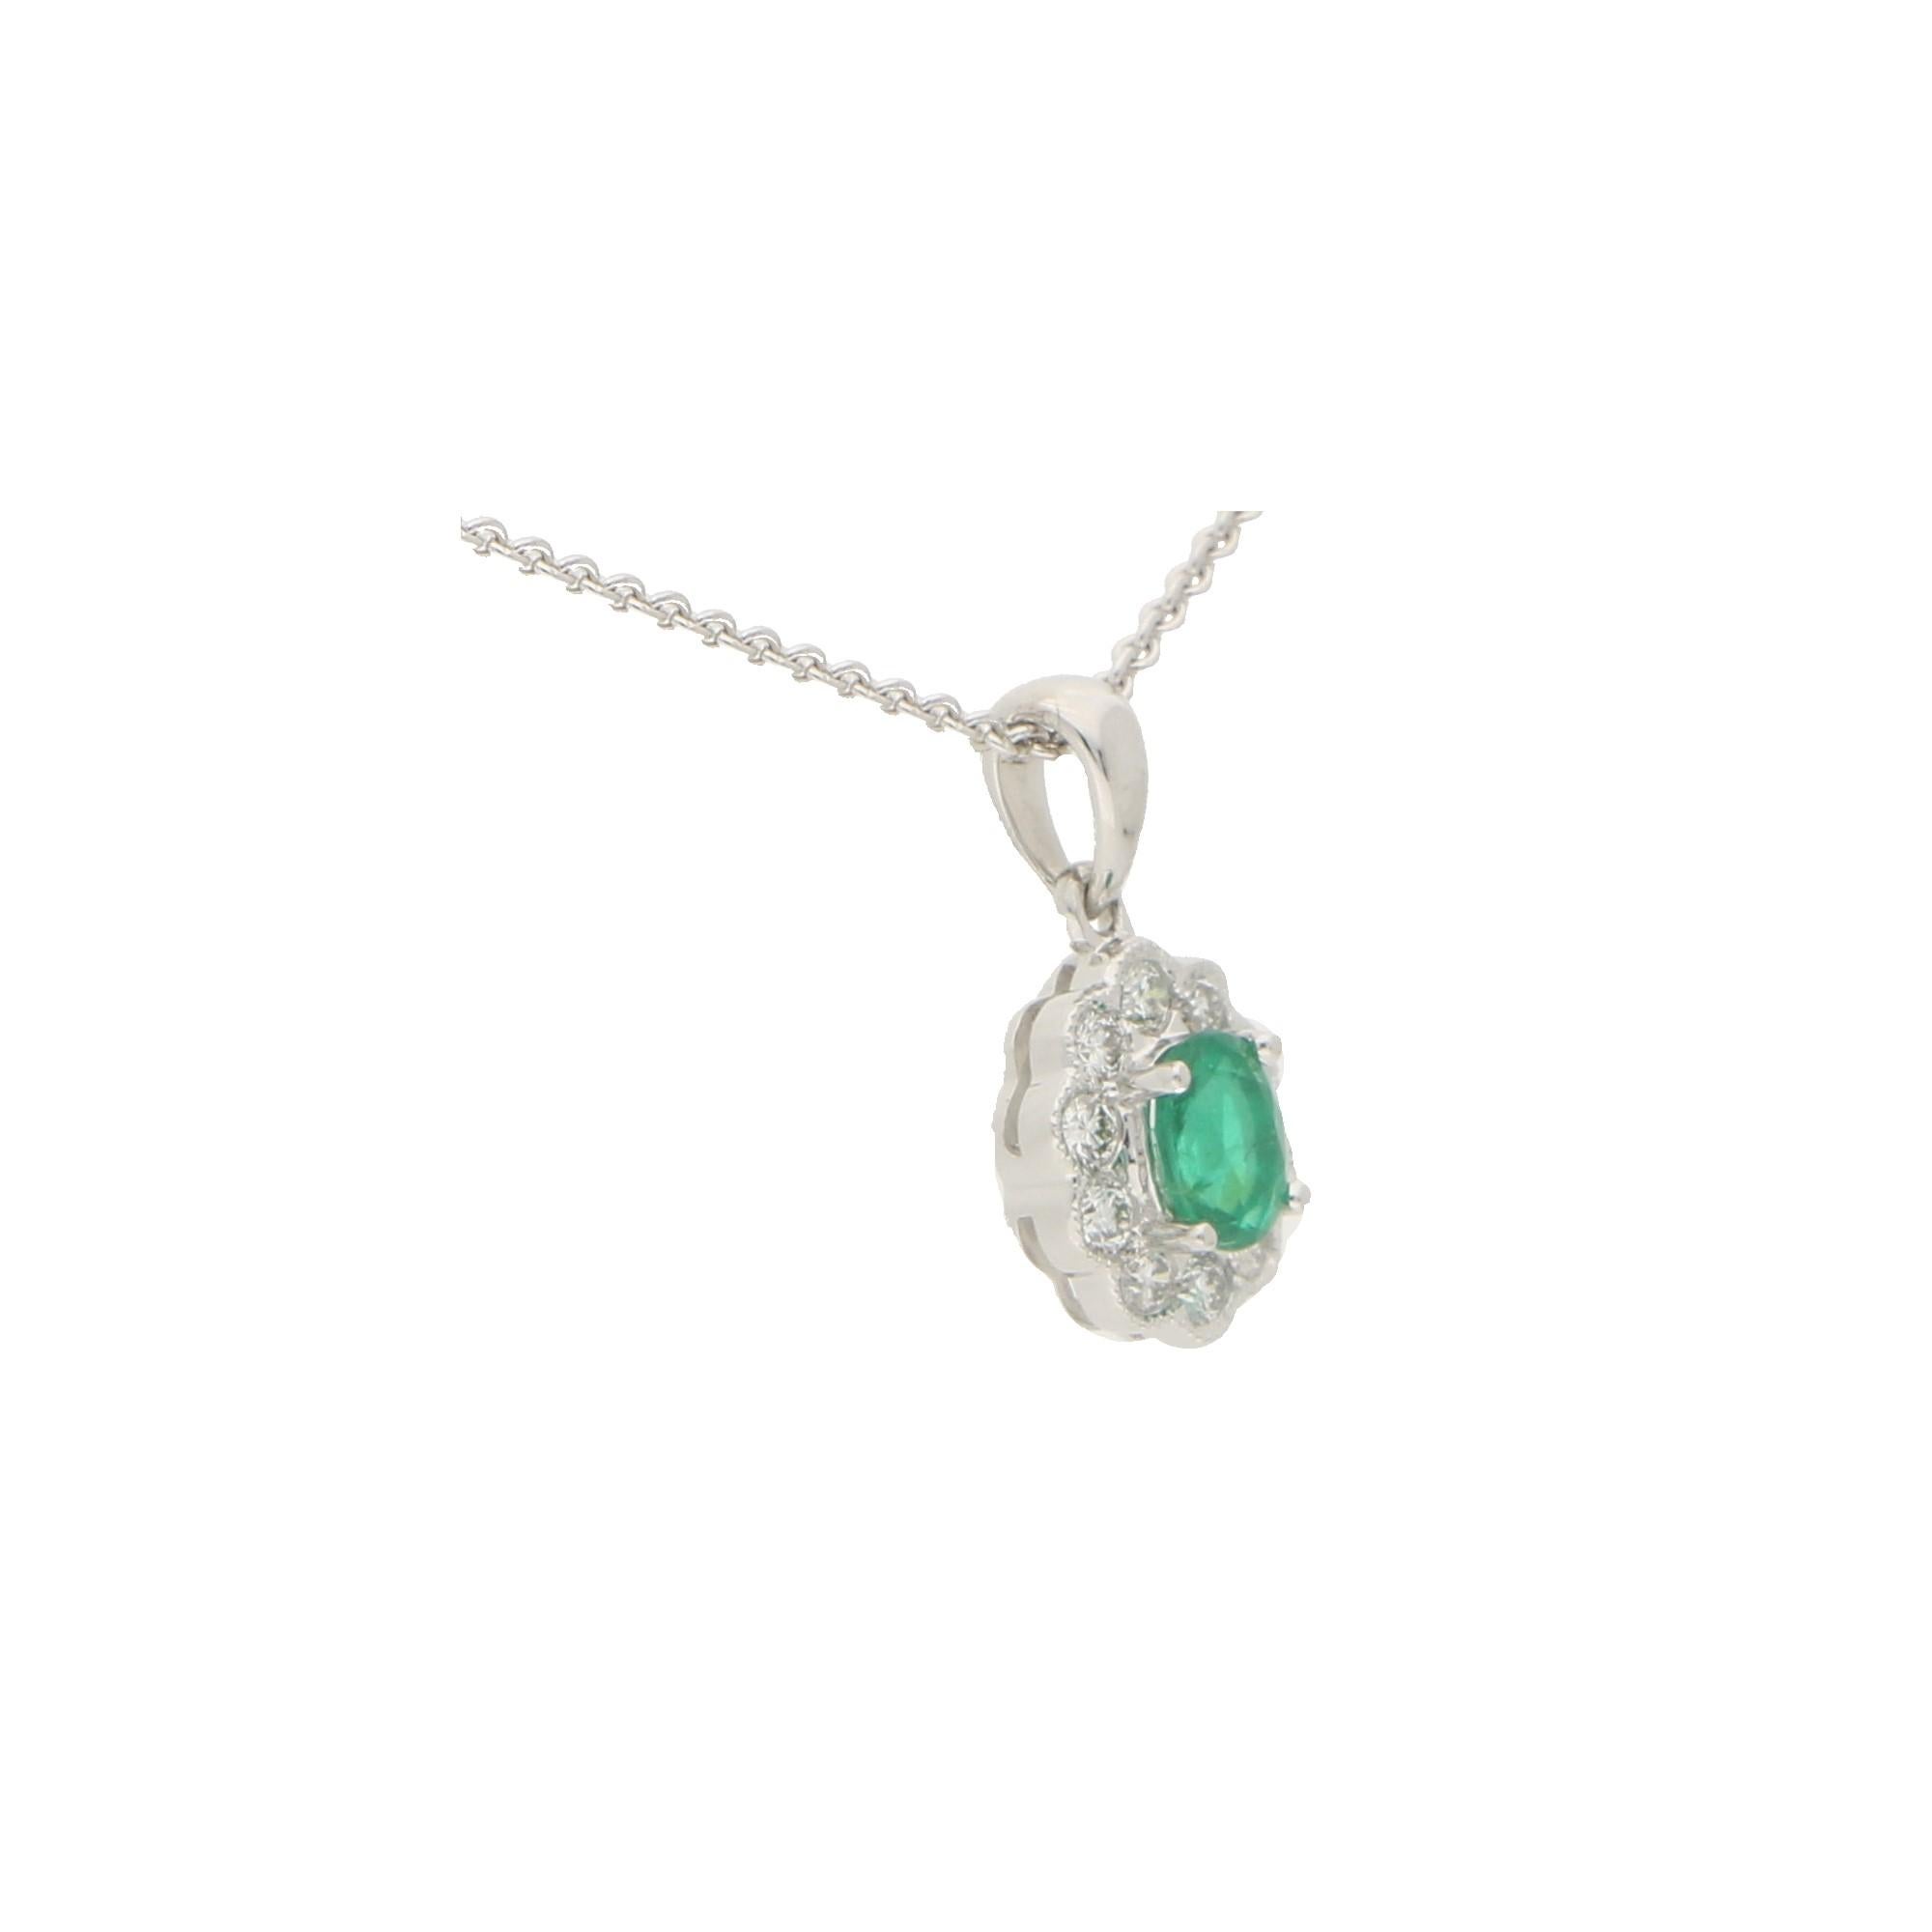 A beautiful emerald and diamond cluster pendant set in 18k white gold.

The pendant is centrally set with a vibrant green coloured oval cut emerald which is surrounded by 10 sparkly round brilliant cut diamonds. The pendant hangs from a white gold